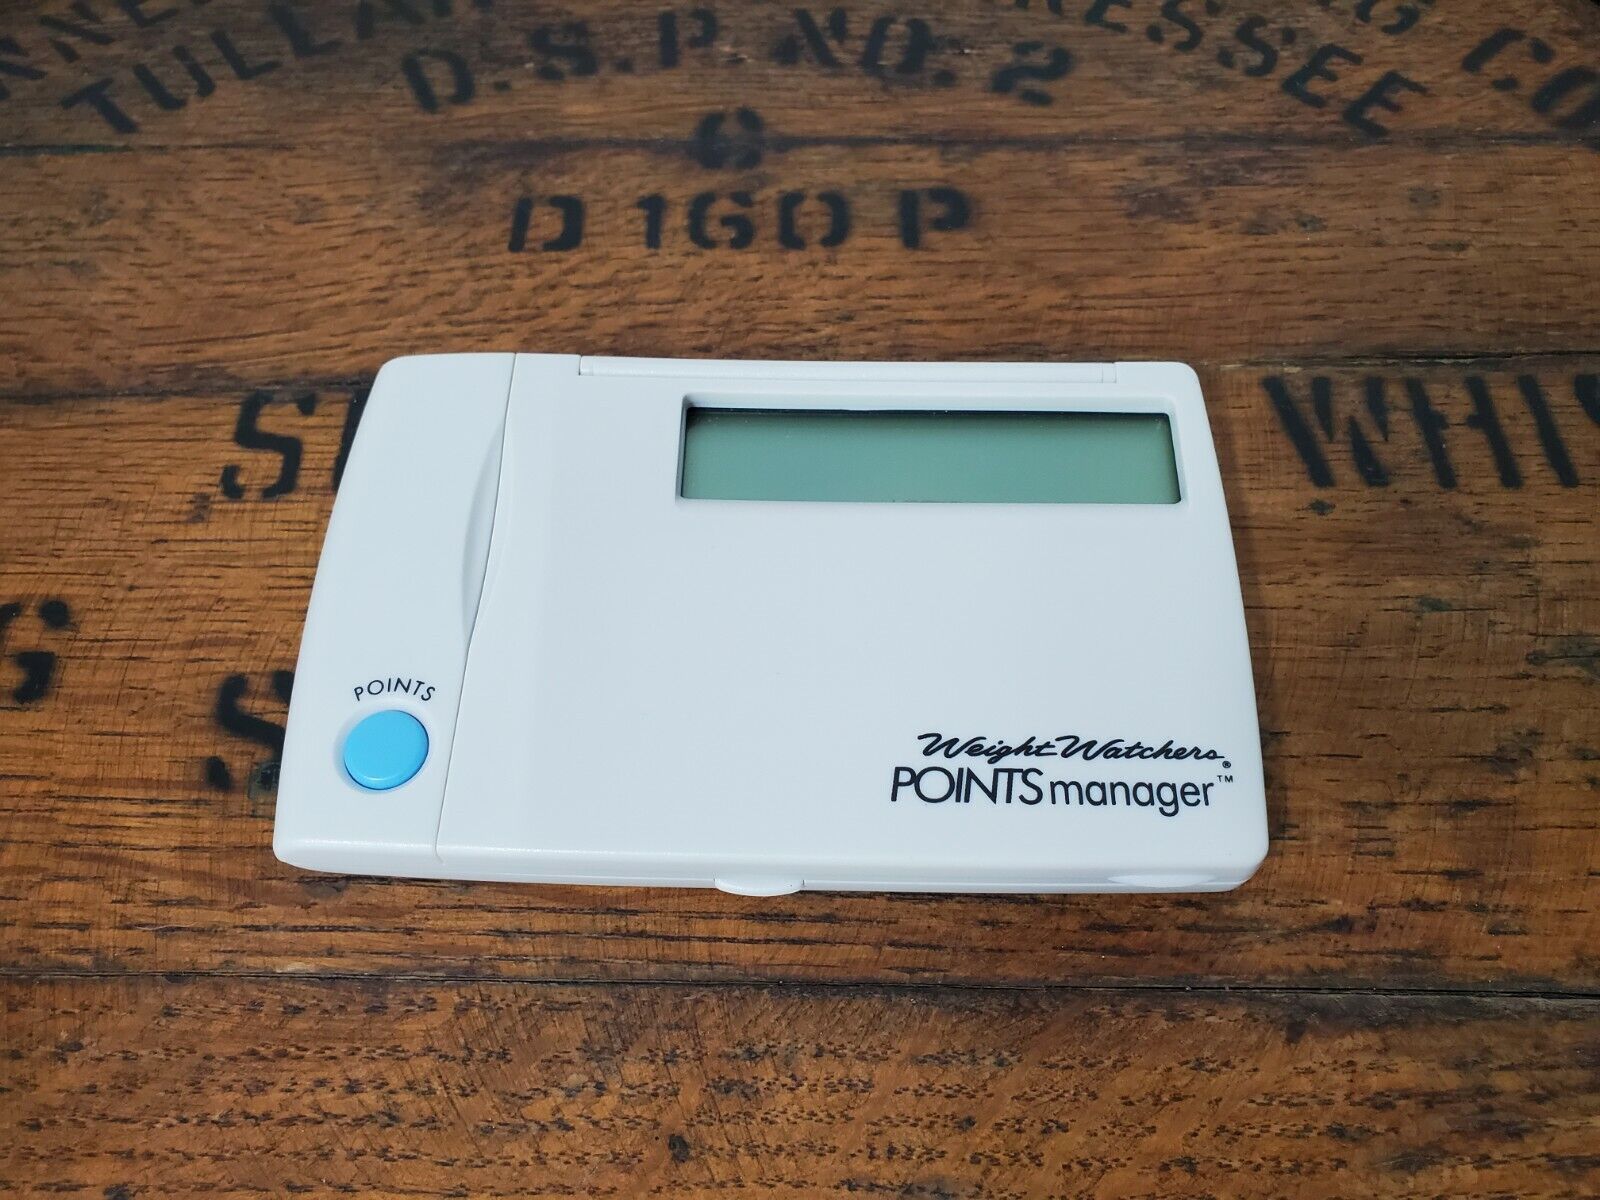 Weight Watchers Points Manager Calculator Model 1818 - From 1997